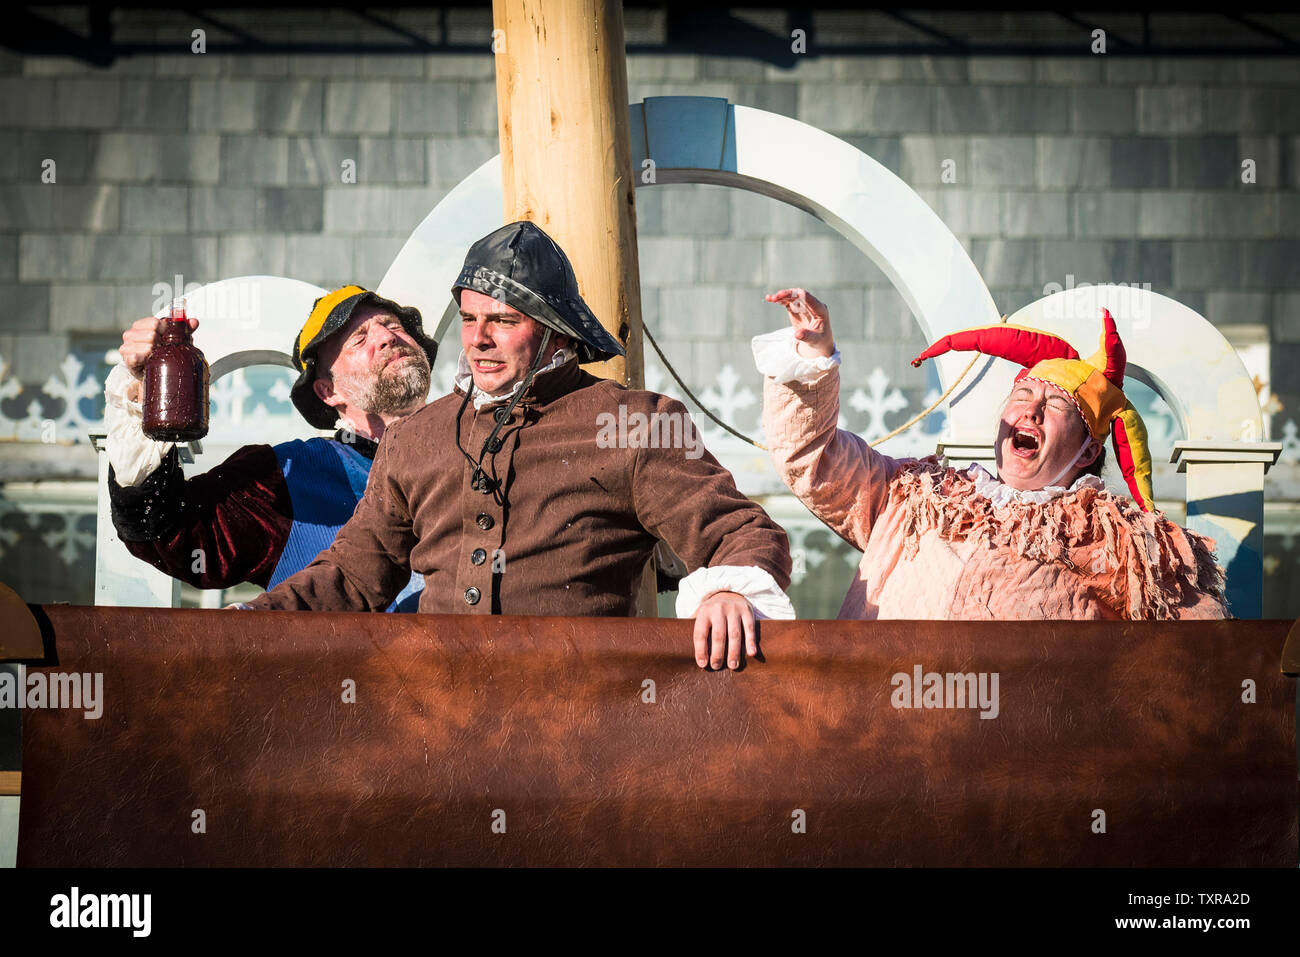 Actors David Sayer, Chris Wills and Katy Helps performing the roles of Stephano, Boatswain and Trinculo in an outdoor theatre production of The Tempes Stock Photo